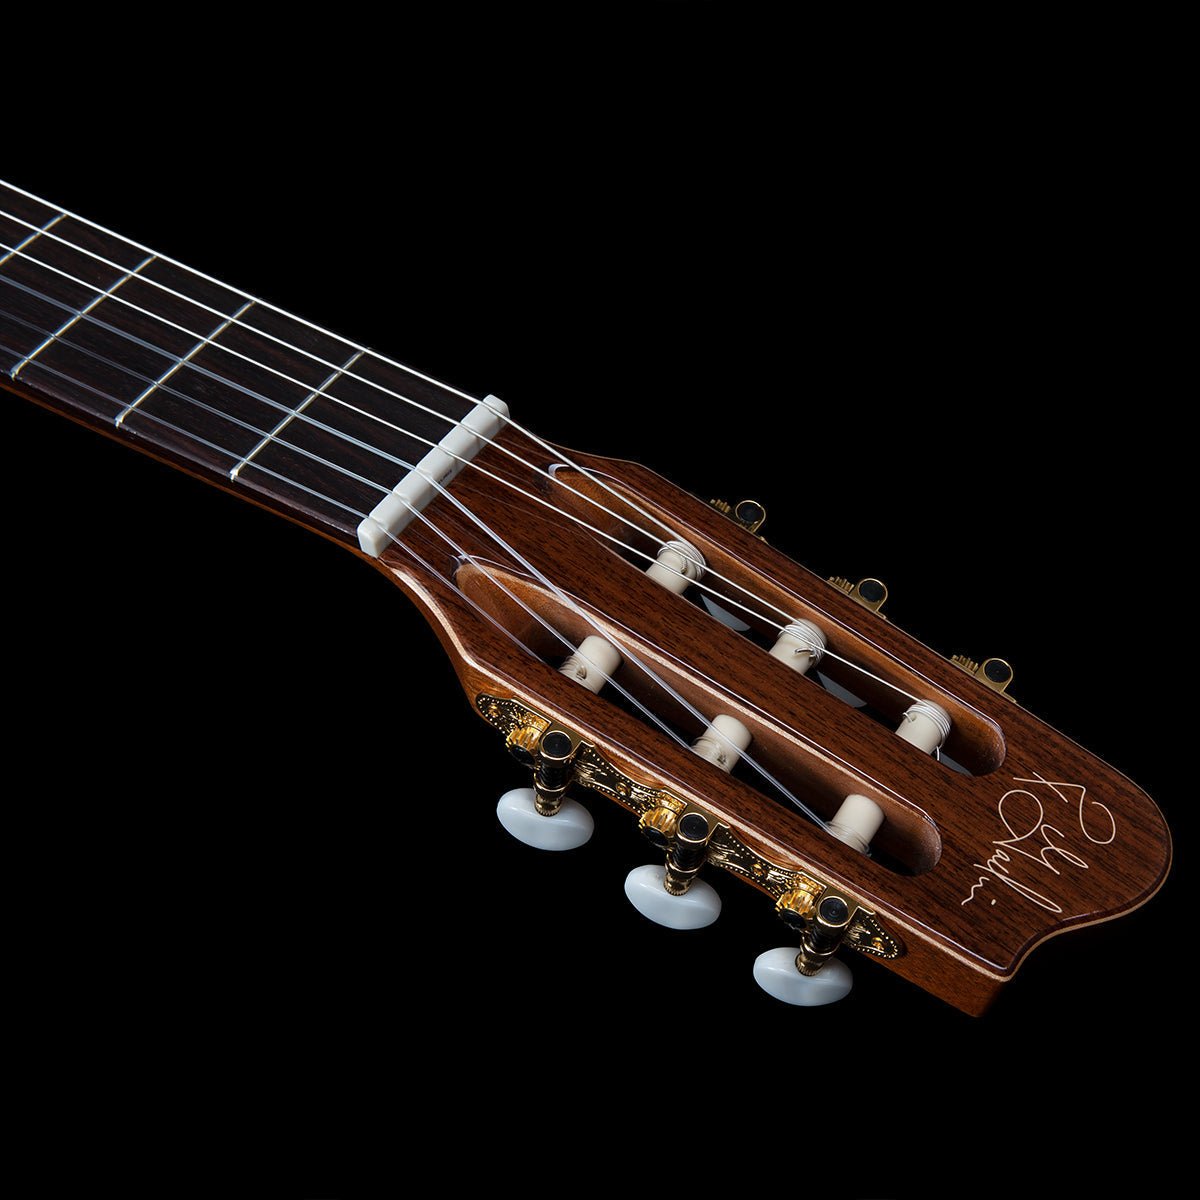 Godin Collection Nylon String Guitar, Acoustic Guitar for sale at Richards Guitars.